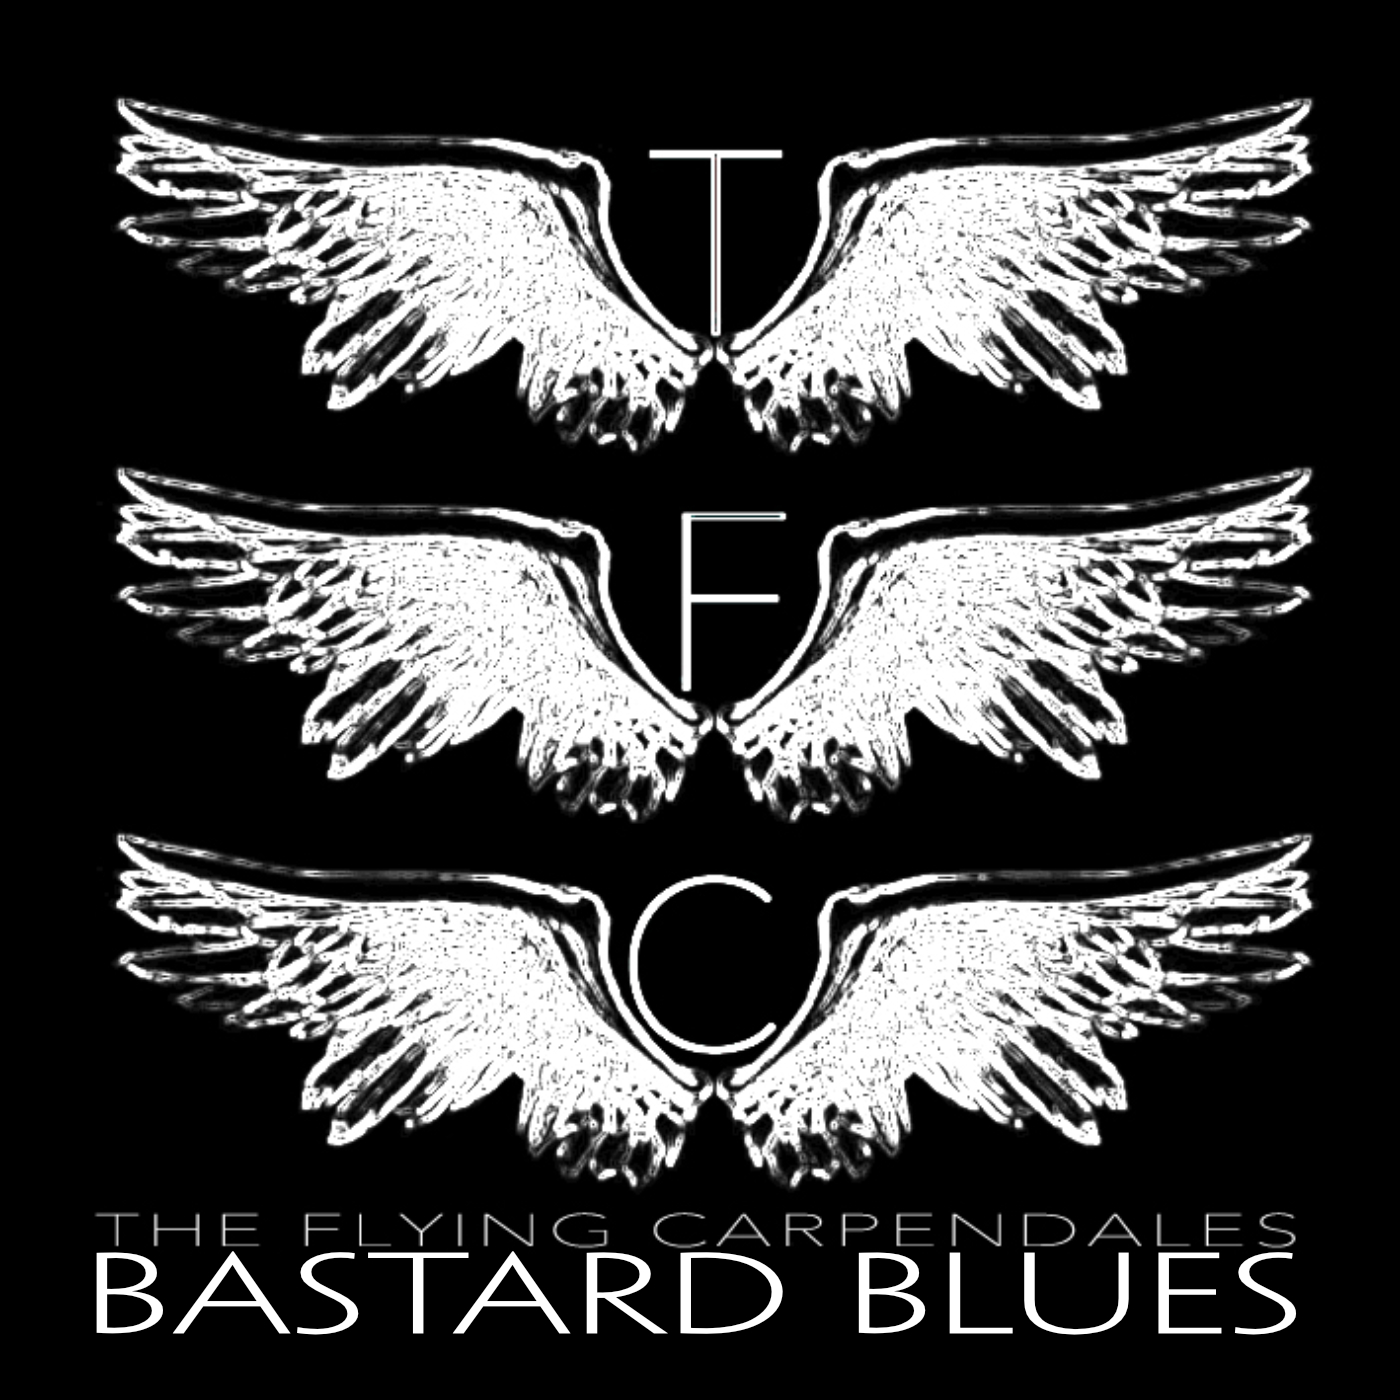 The Flying Carpendales: Bastard Blues (#spamindierecords)